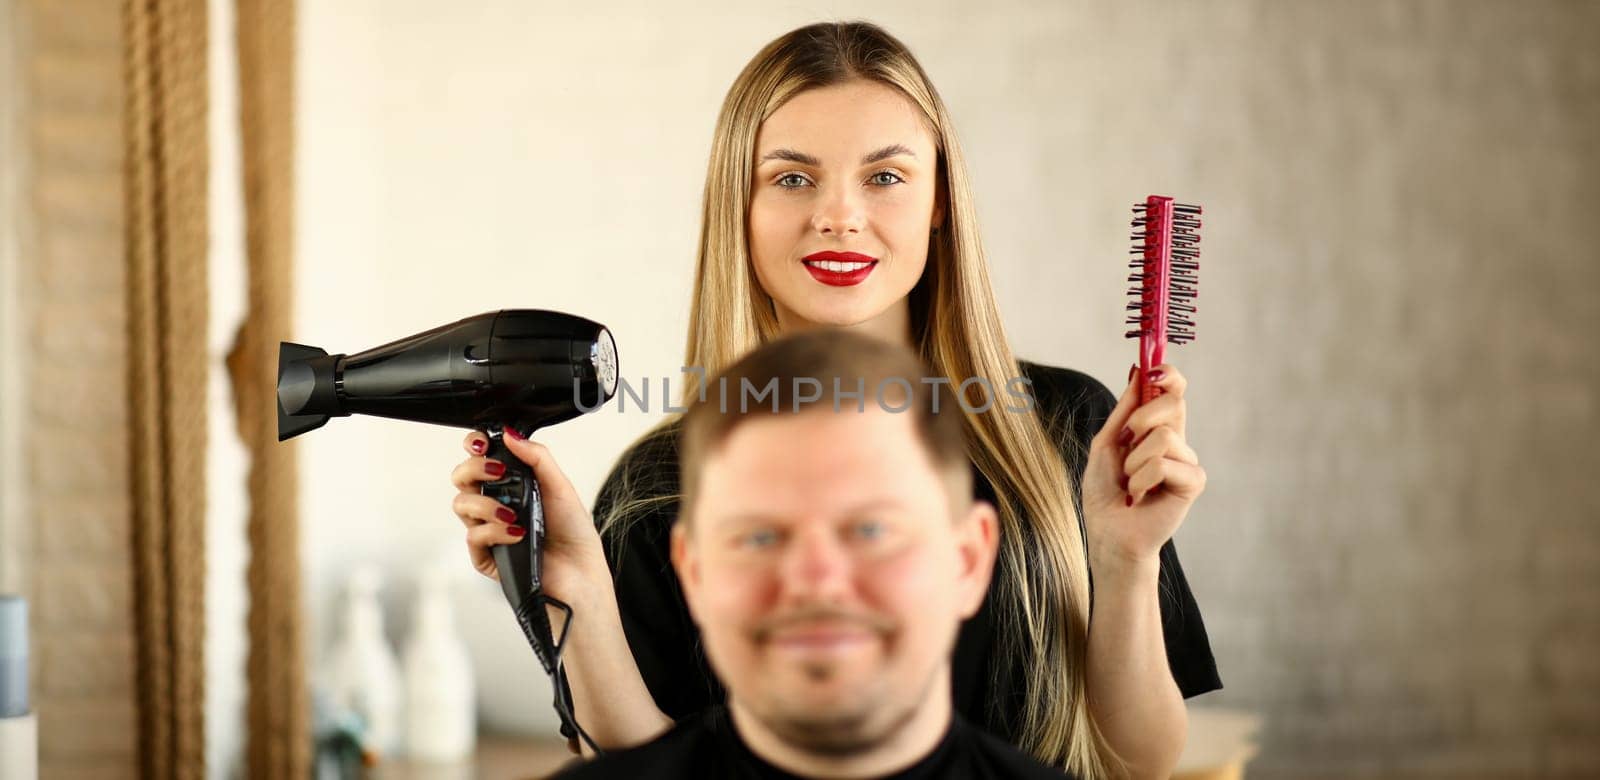 Blonde Hairstylist Using Dryer and Comb for Man.Young Hairdresser Styling Male Haircut with Hairdryer and Hairbrush. Woman Stylist Holding Tool for Hairstyling. Beautician and Client Looking at Camera